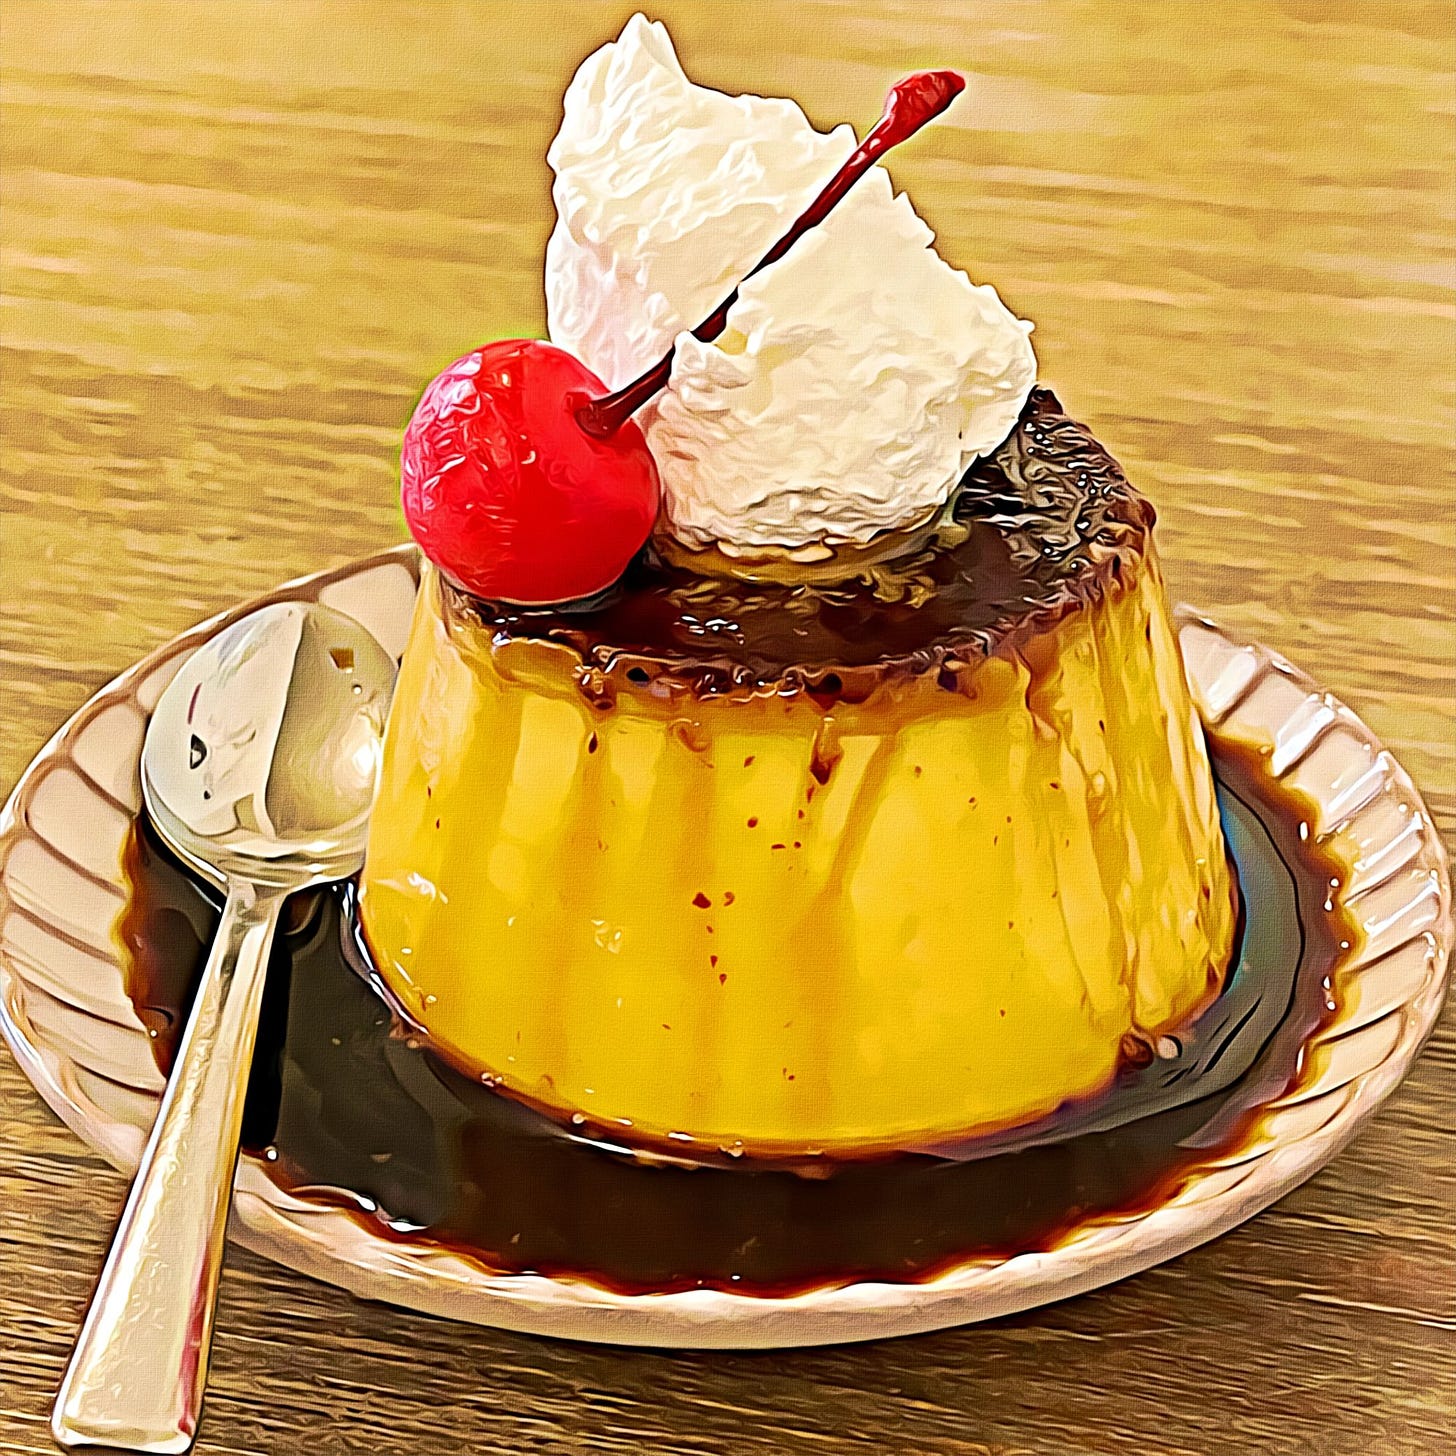 Golden pudding in a small tea plate, surrounded by dark syrup, topped with whipped cream and a cherry.